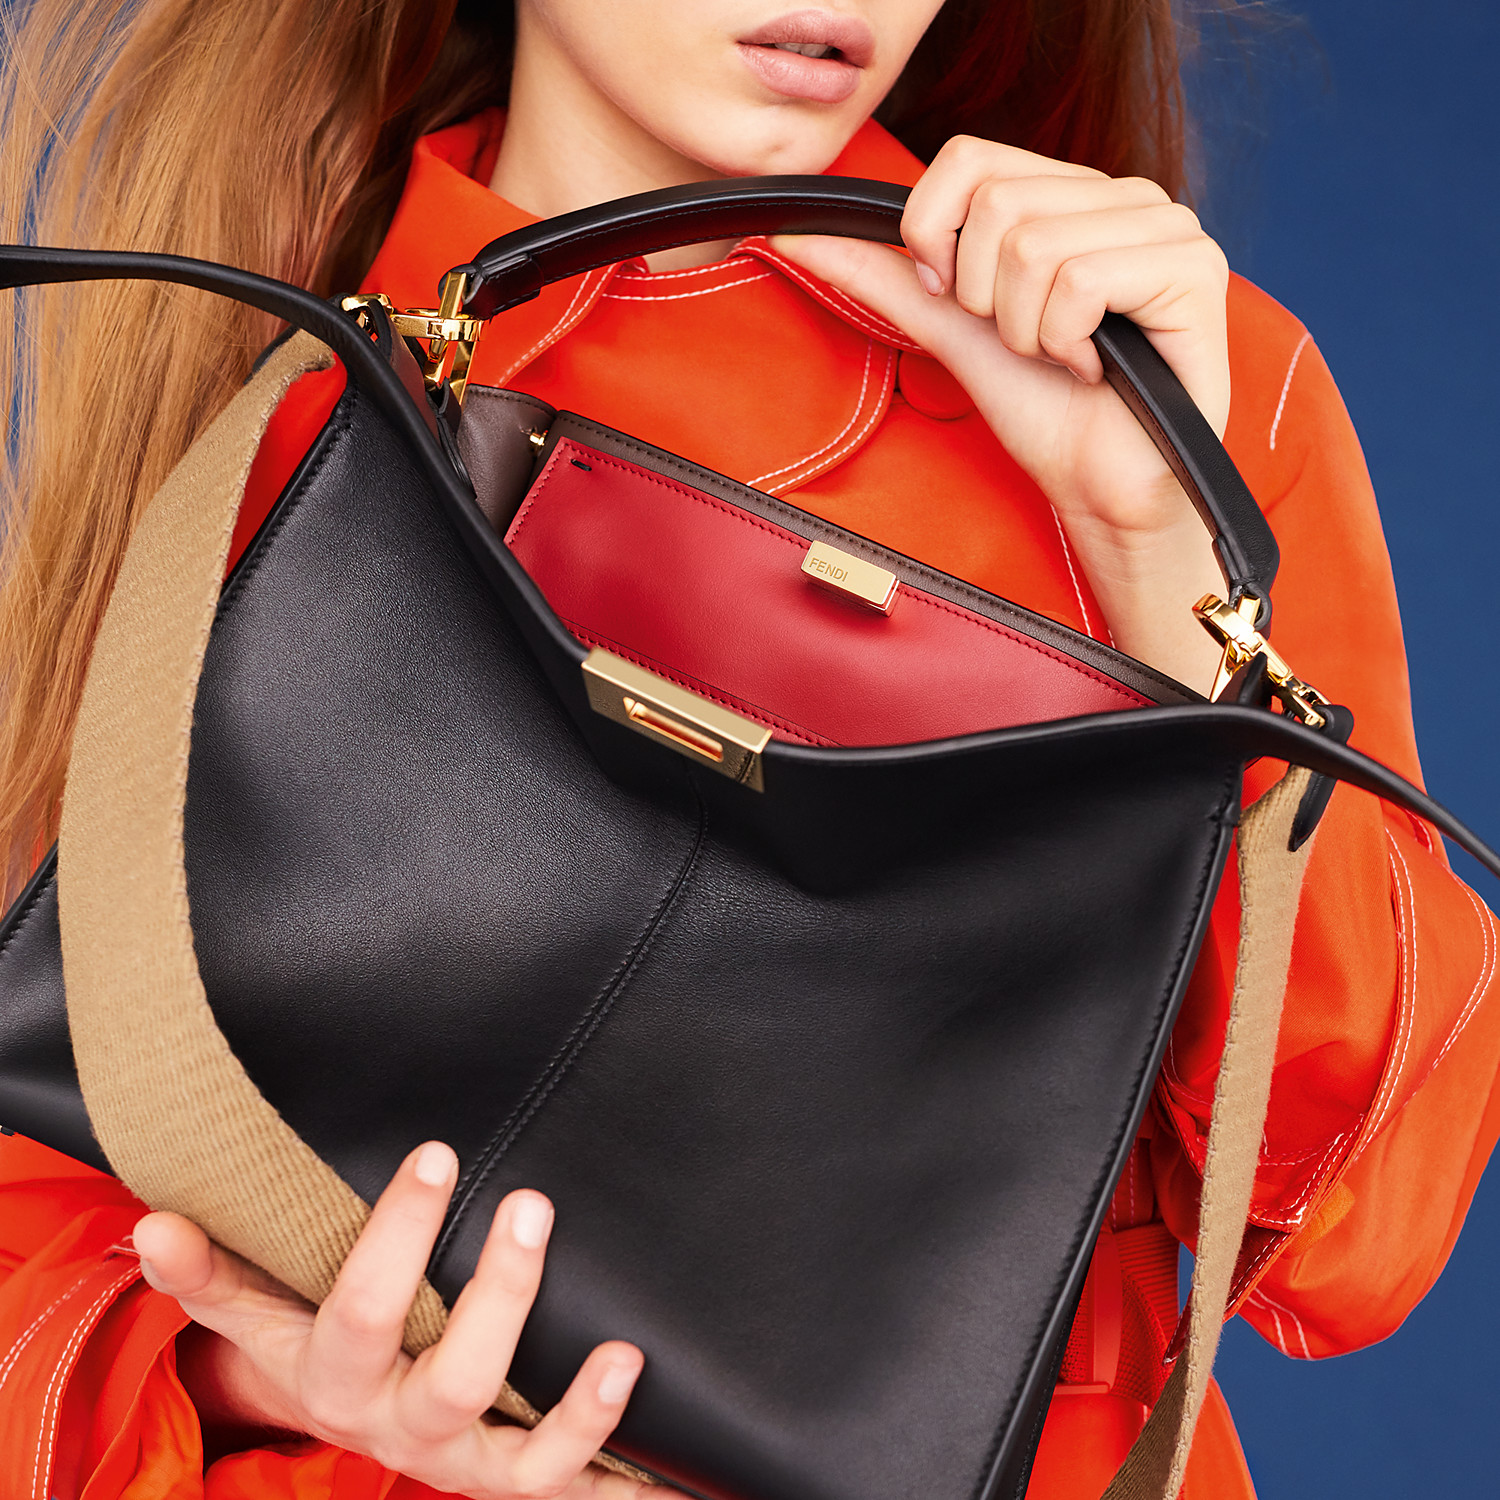 Fendi Peekaboo Bag 1 Discover the Top 10 Luxurious Handbags Every Woman Should Know About - 9